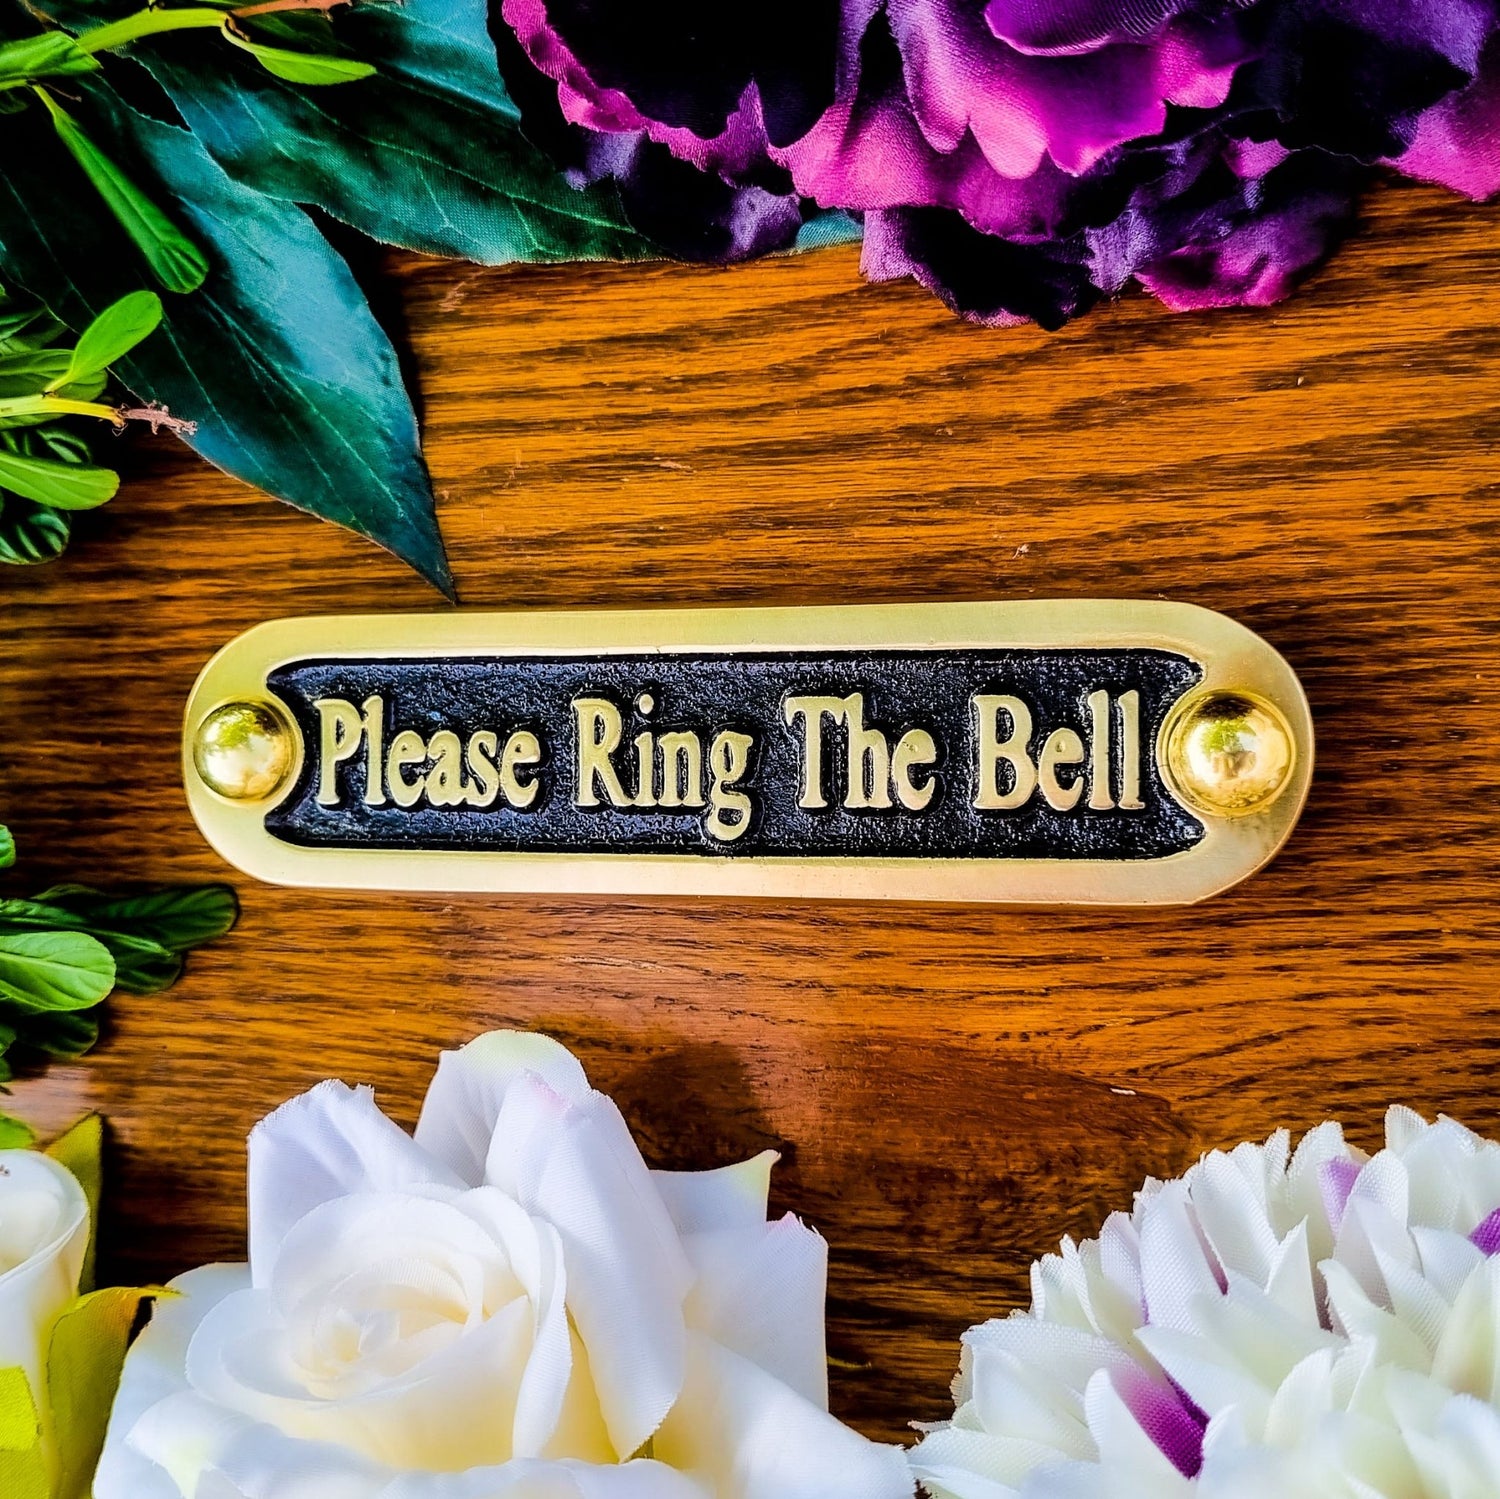 Please Ring the Bell